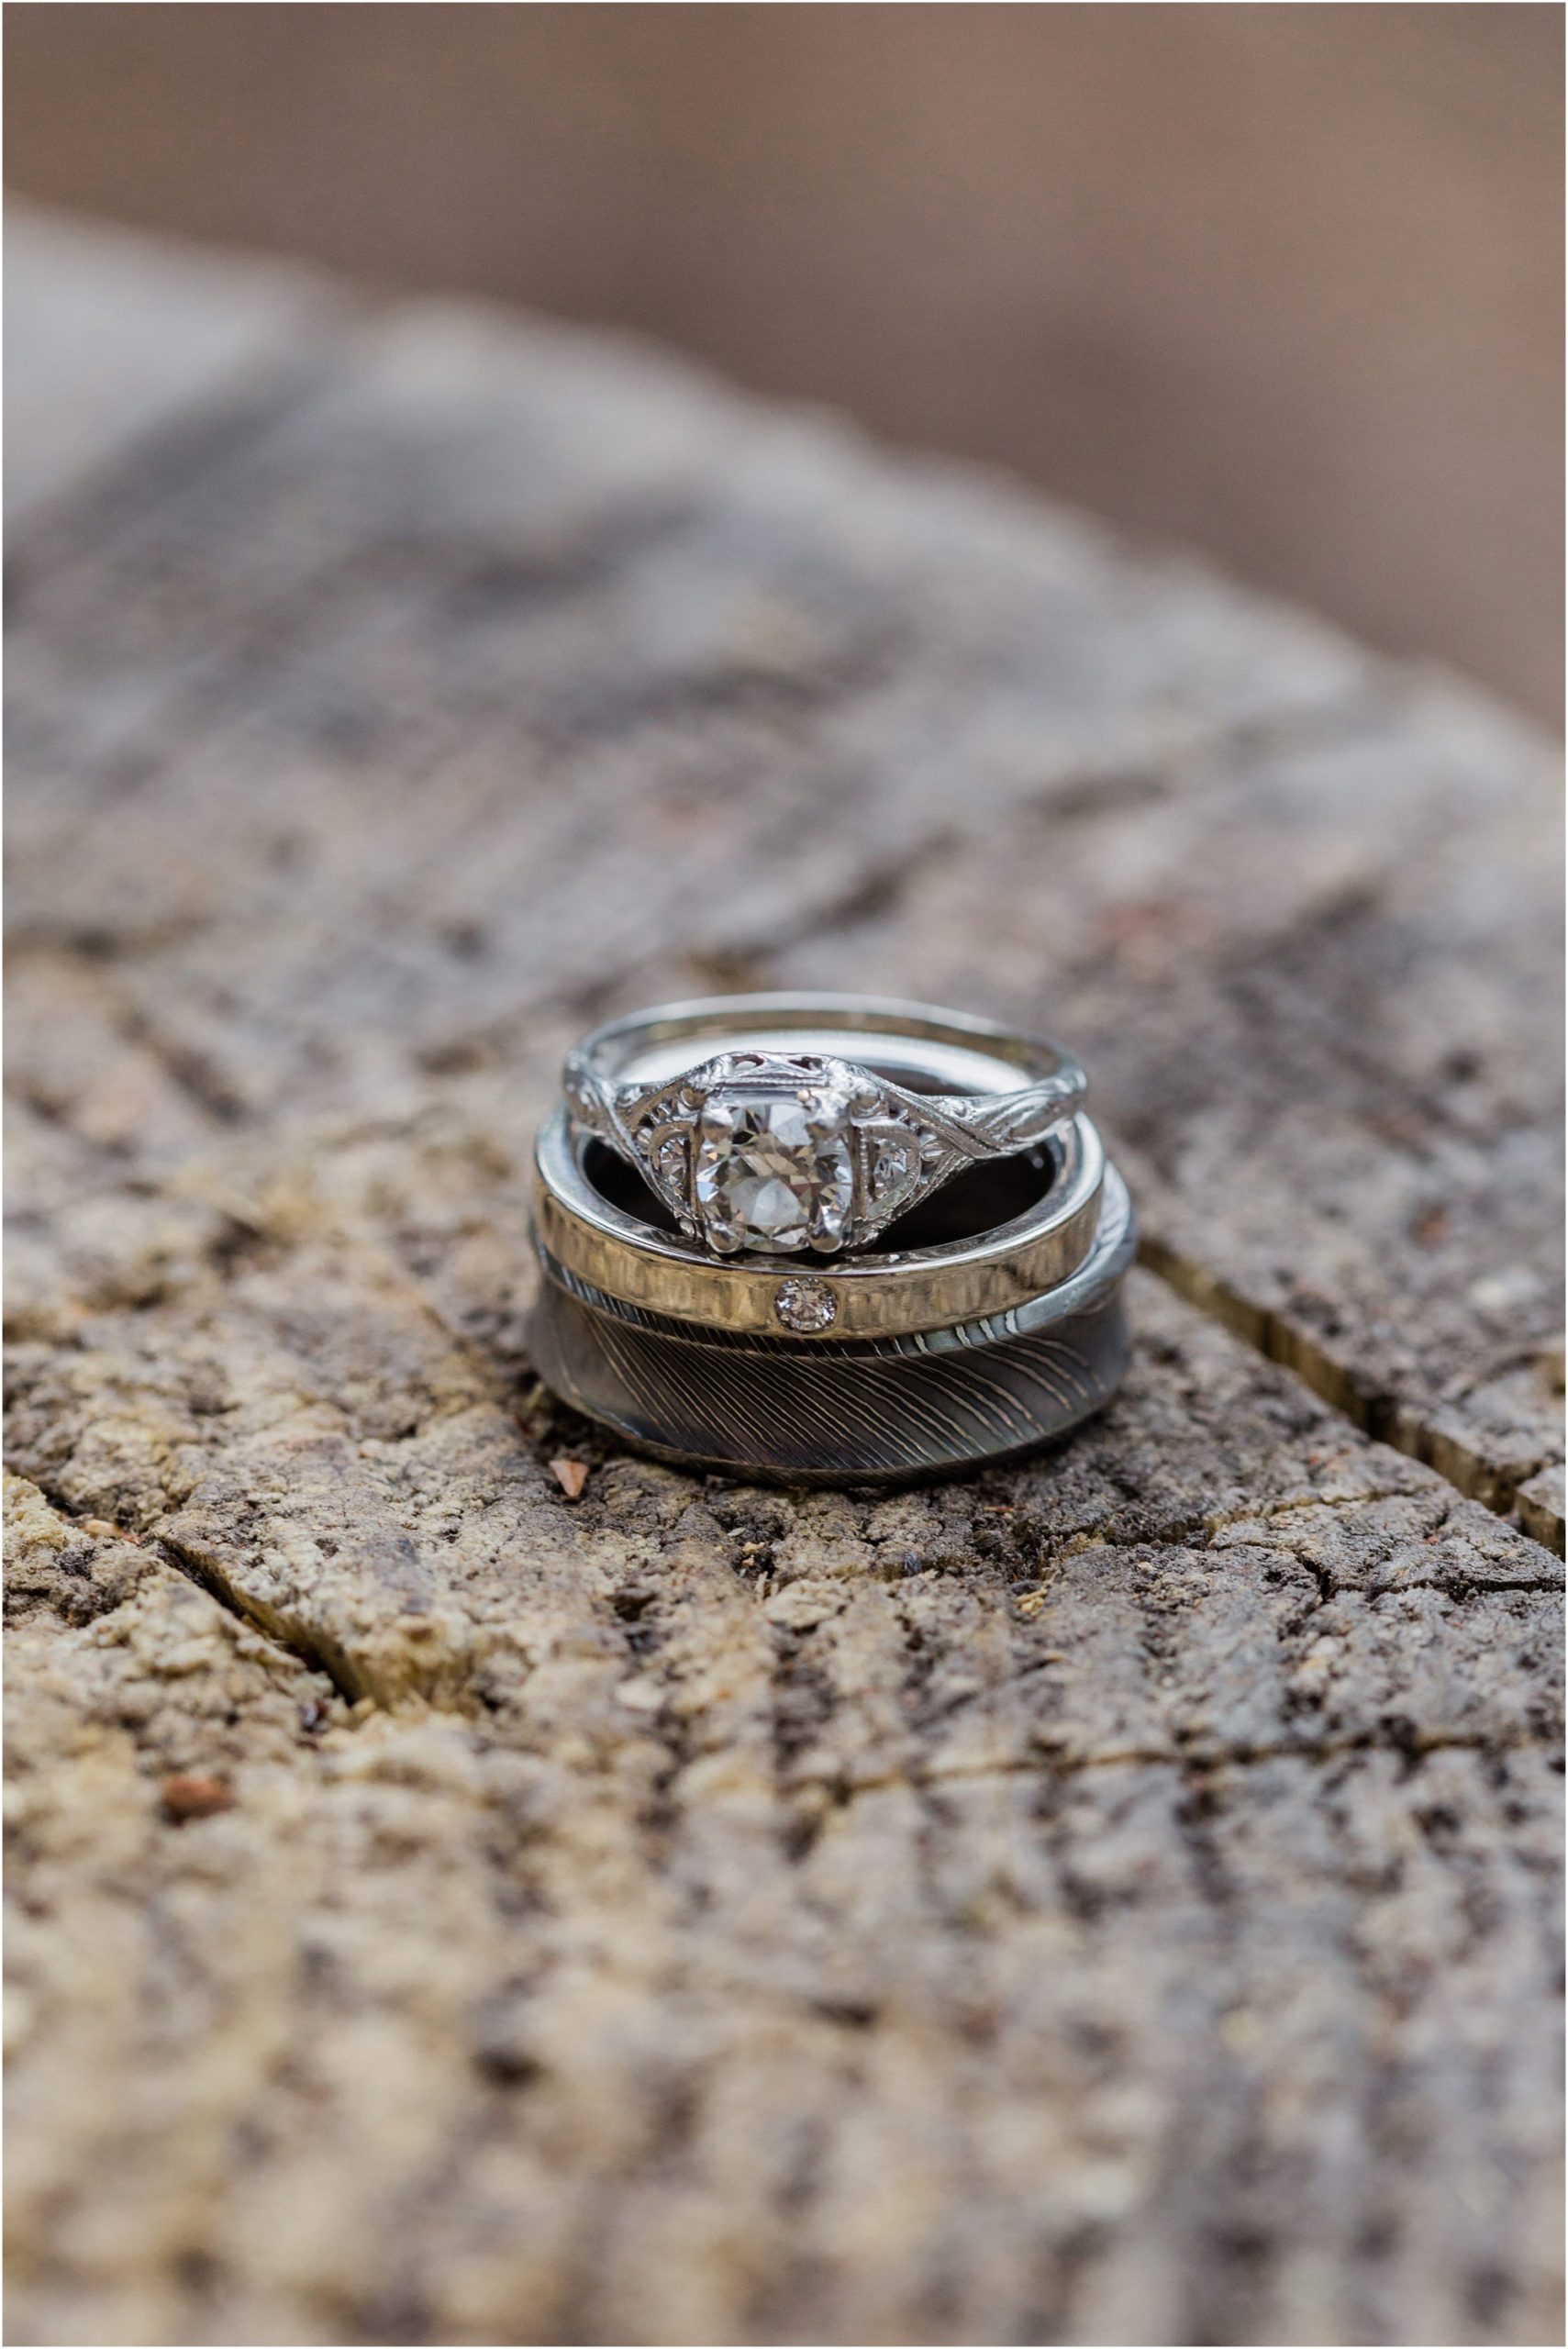 A unique deer antler and titanium wedding band for the groom and an antique family heirloom engagement ring for the bride. | Erica Swantek Photography